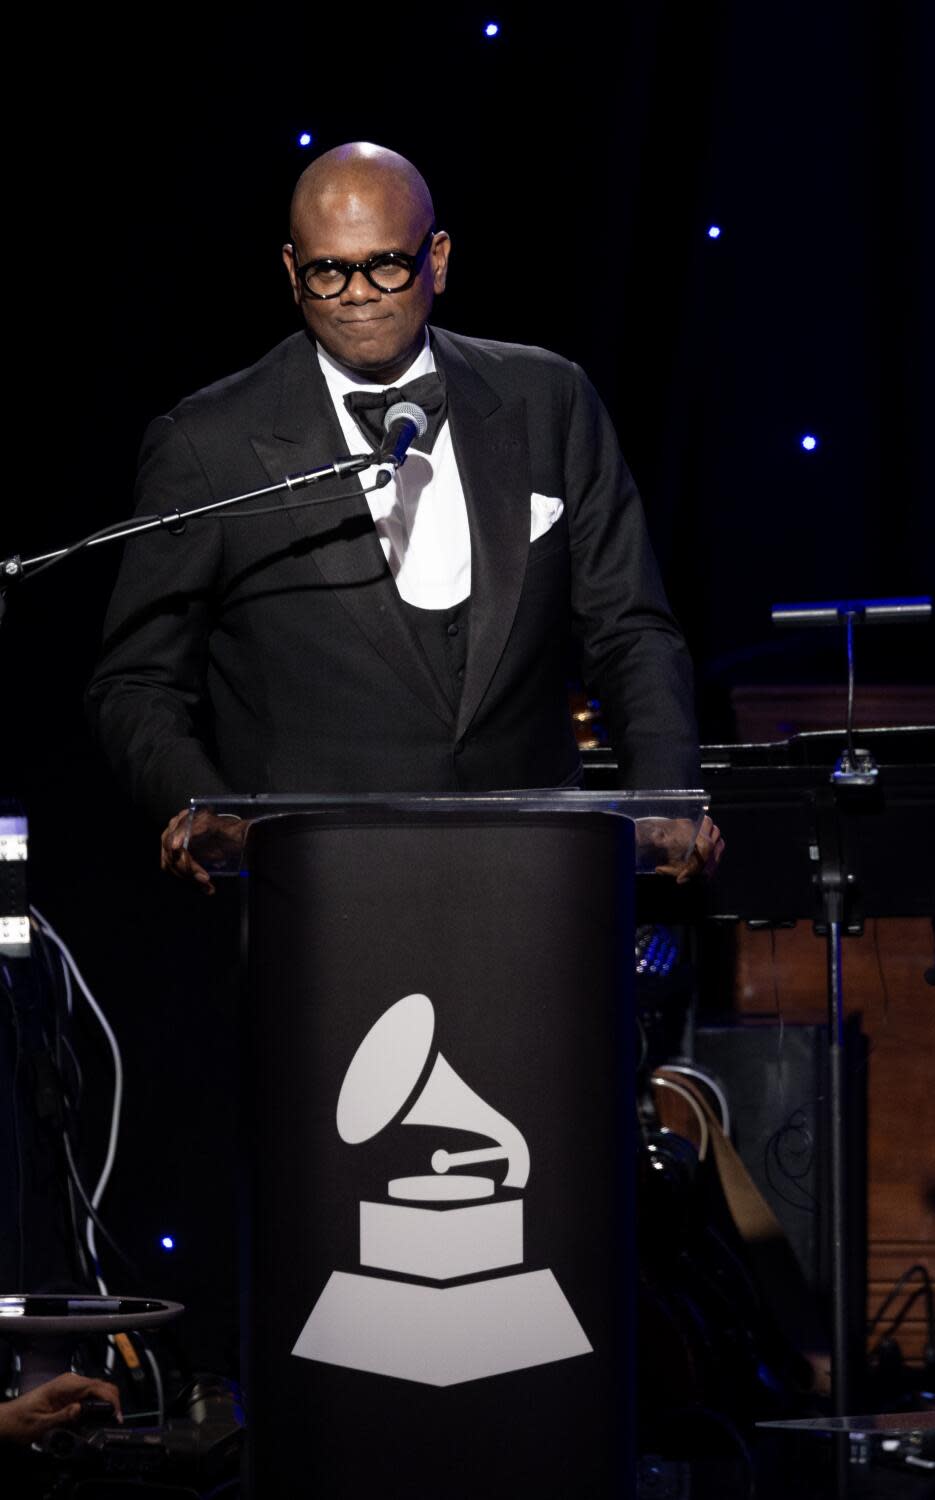 Honoree Jon Platt accepts the Industry Icon award during the 66th Grammy Awards Pre-Grammy Gala.